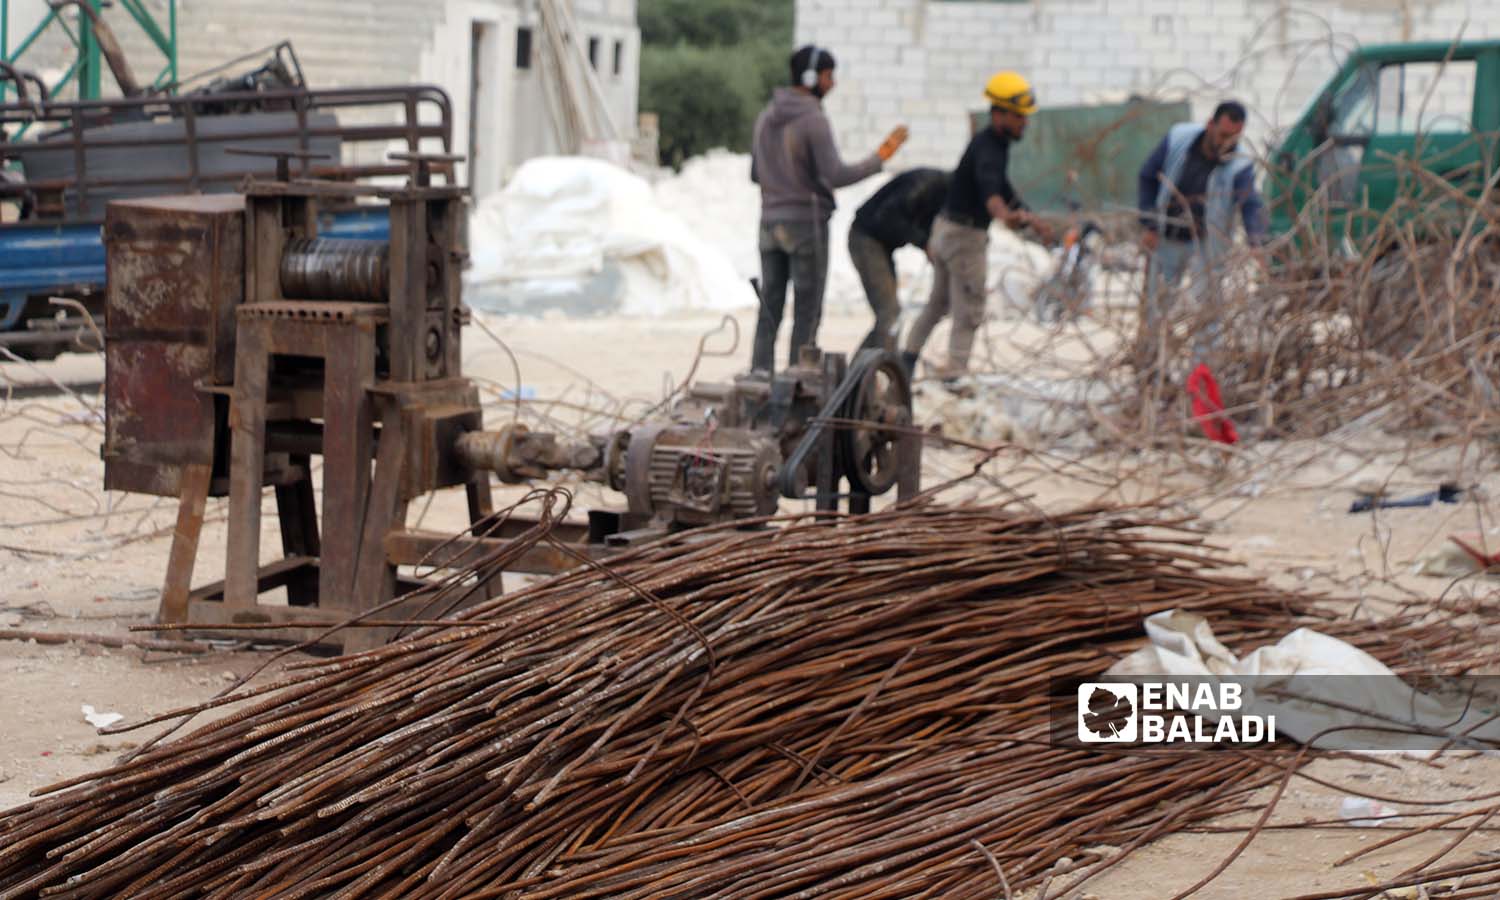 Construction workers straighten iron bars collected from quake-destroyed buildings to recycle them in Salqin city in Idlib countryside - April 30, 2023 (Enab Baladi/Iyad Abdul Jawad)
